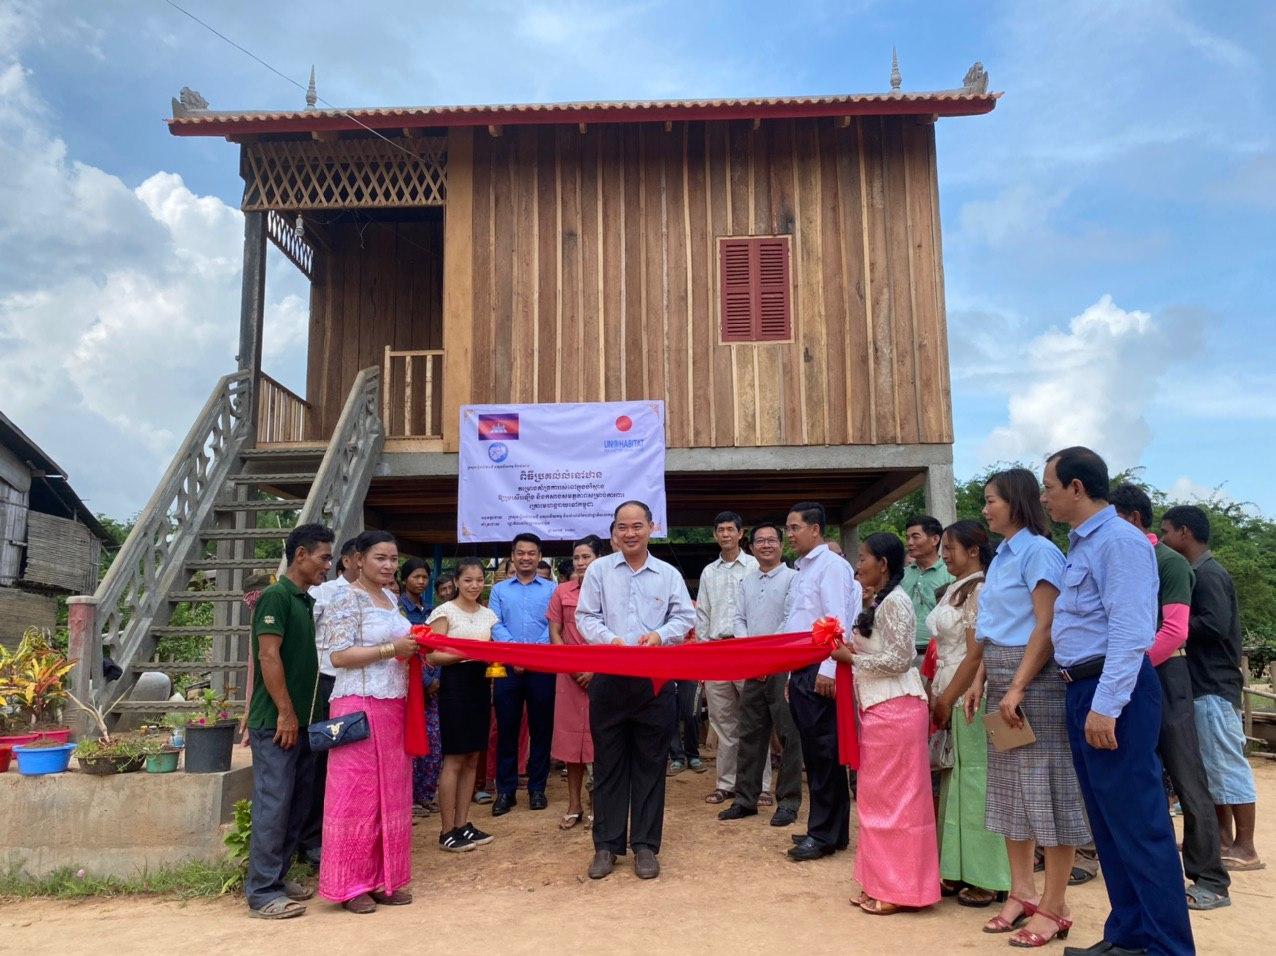 UN-Habitat Programme Manager for Cambodia Vanna Sok at the official handover of over 200 new and rehabilitated houses to families whose homes were damaged or destroyed in flooding in 2018